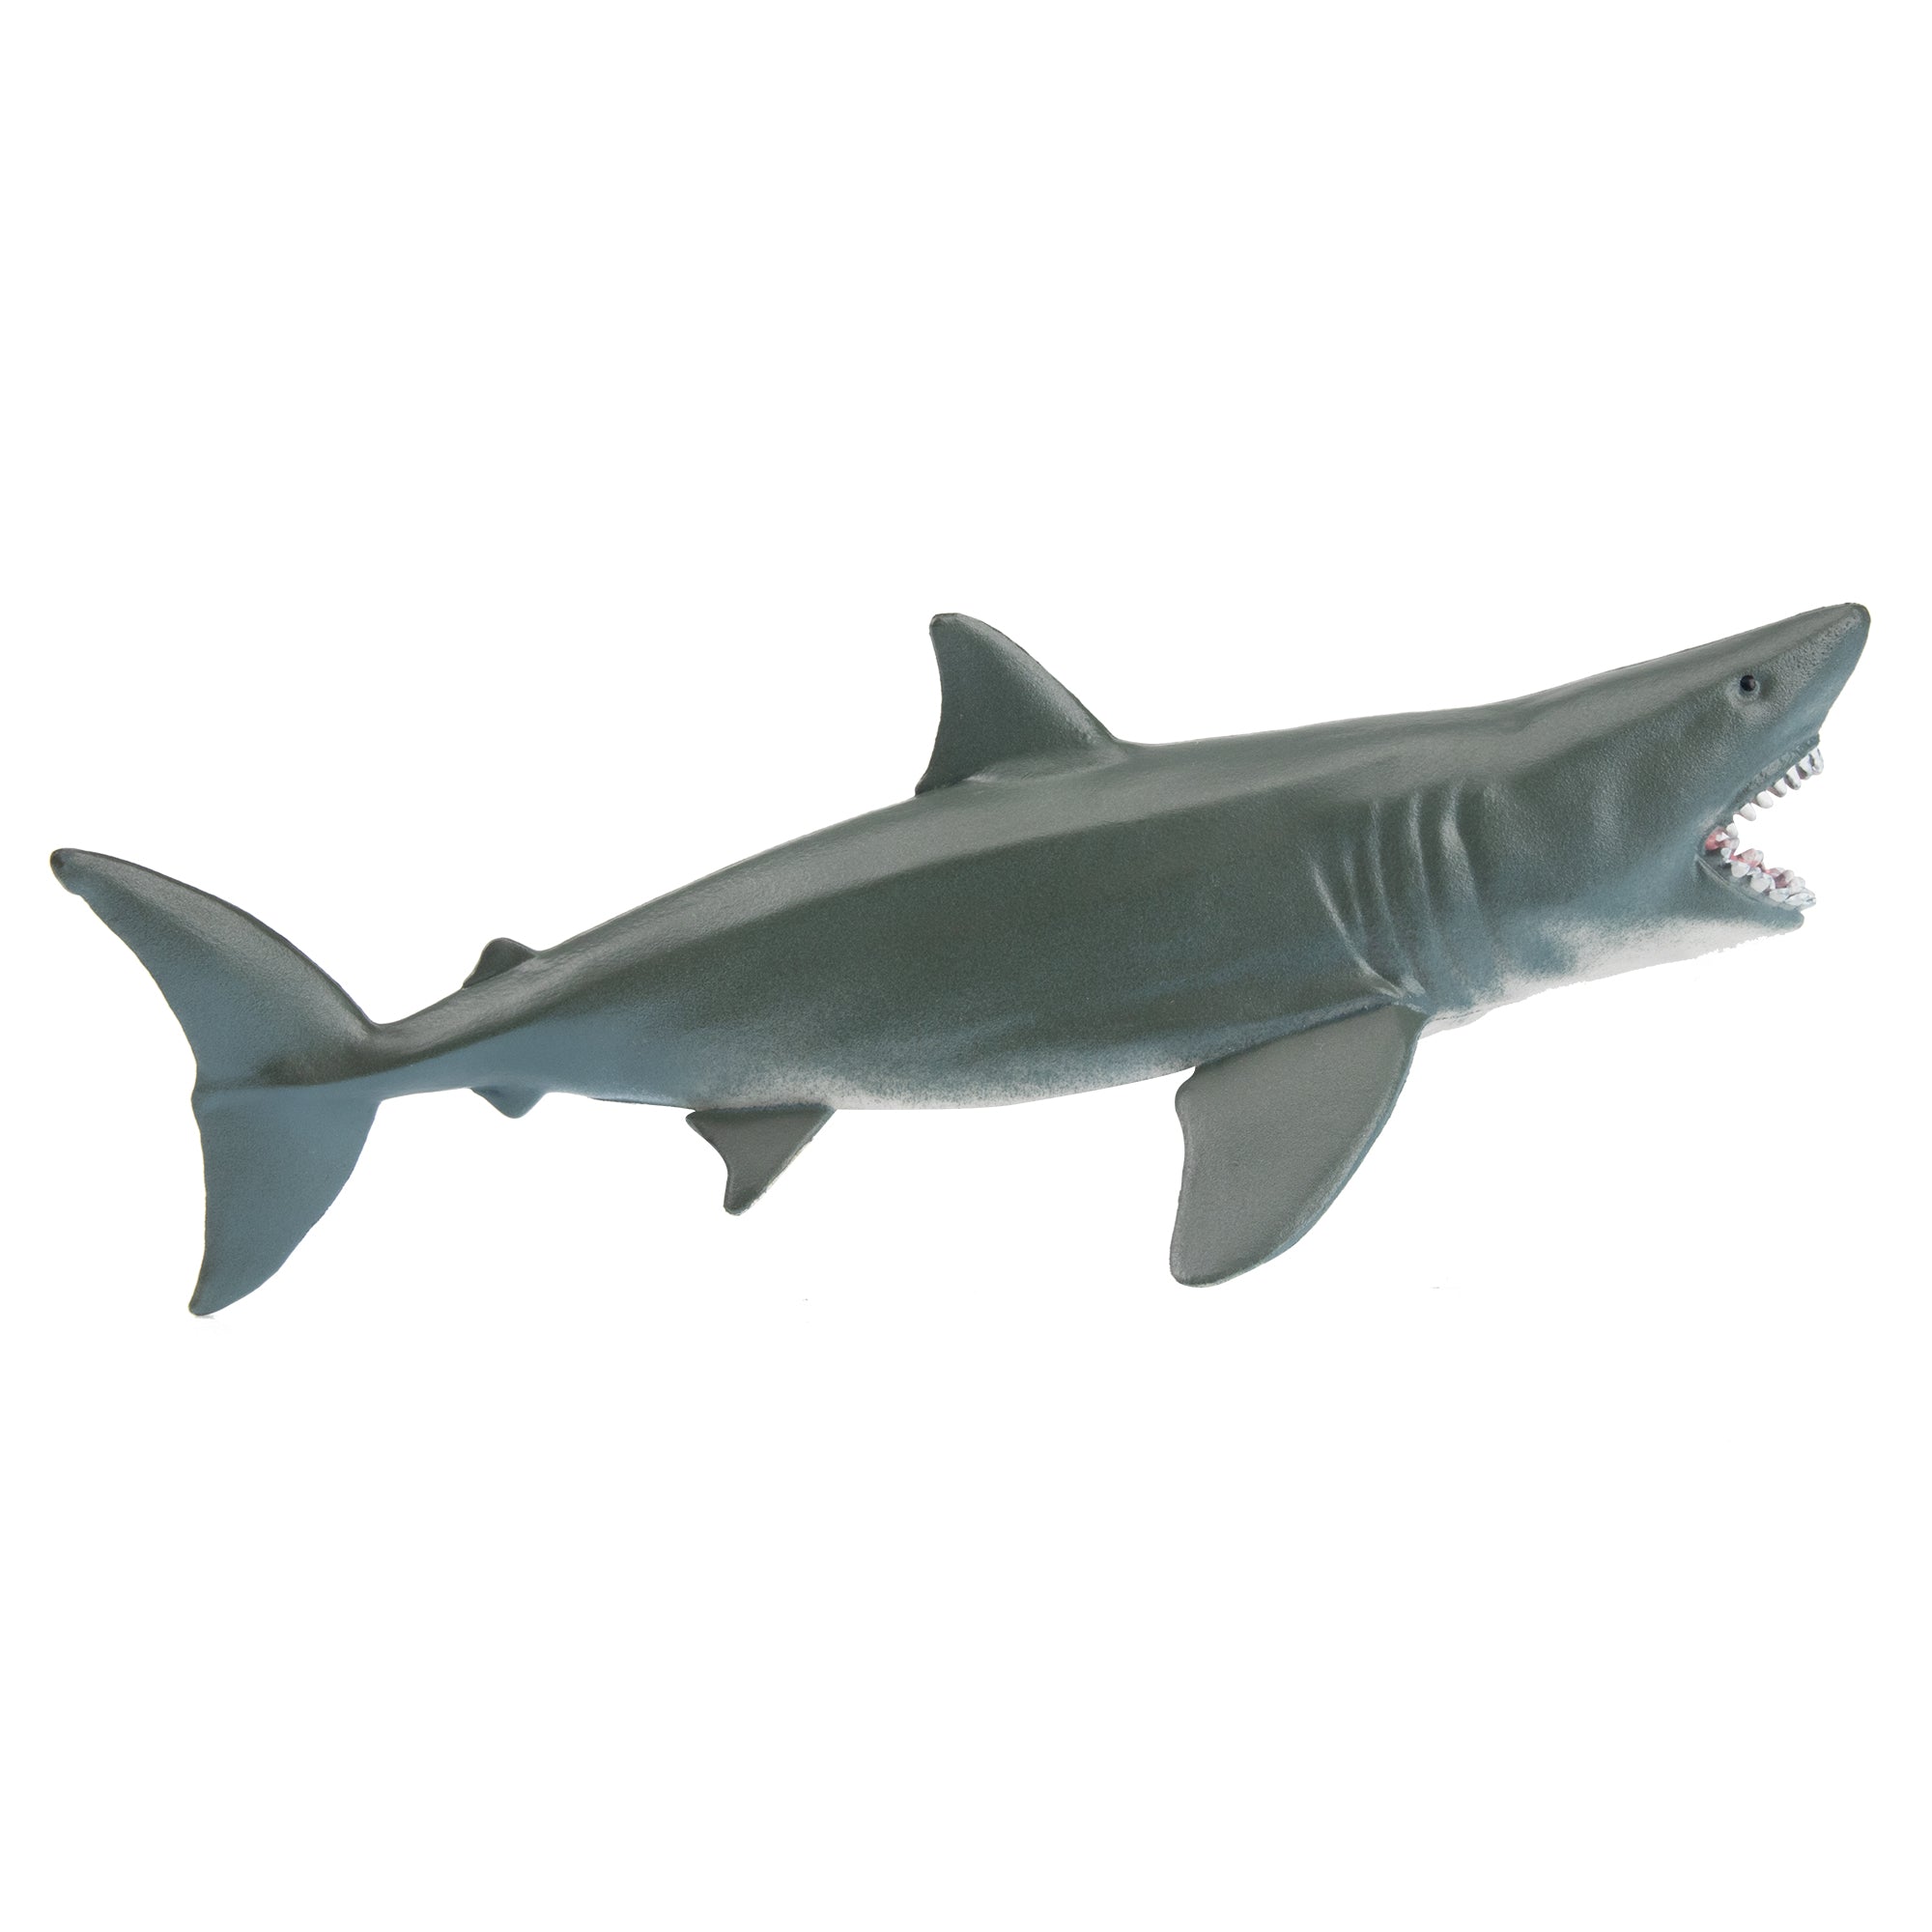 Toymany Open-Mouthed Great White Shark Figurine Toy